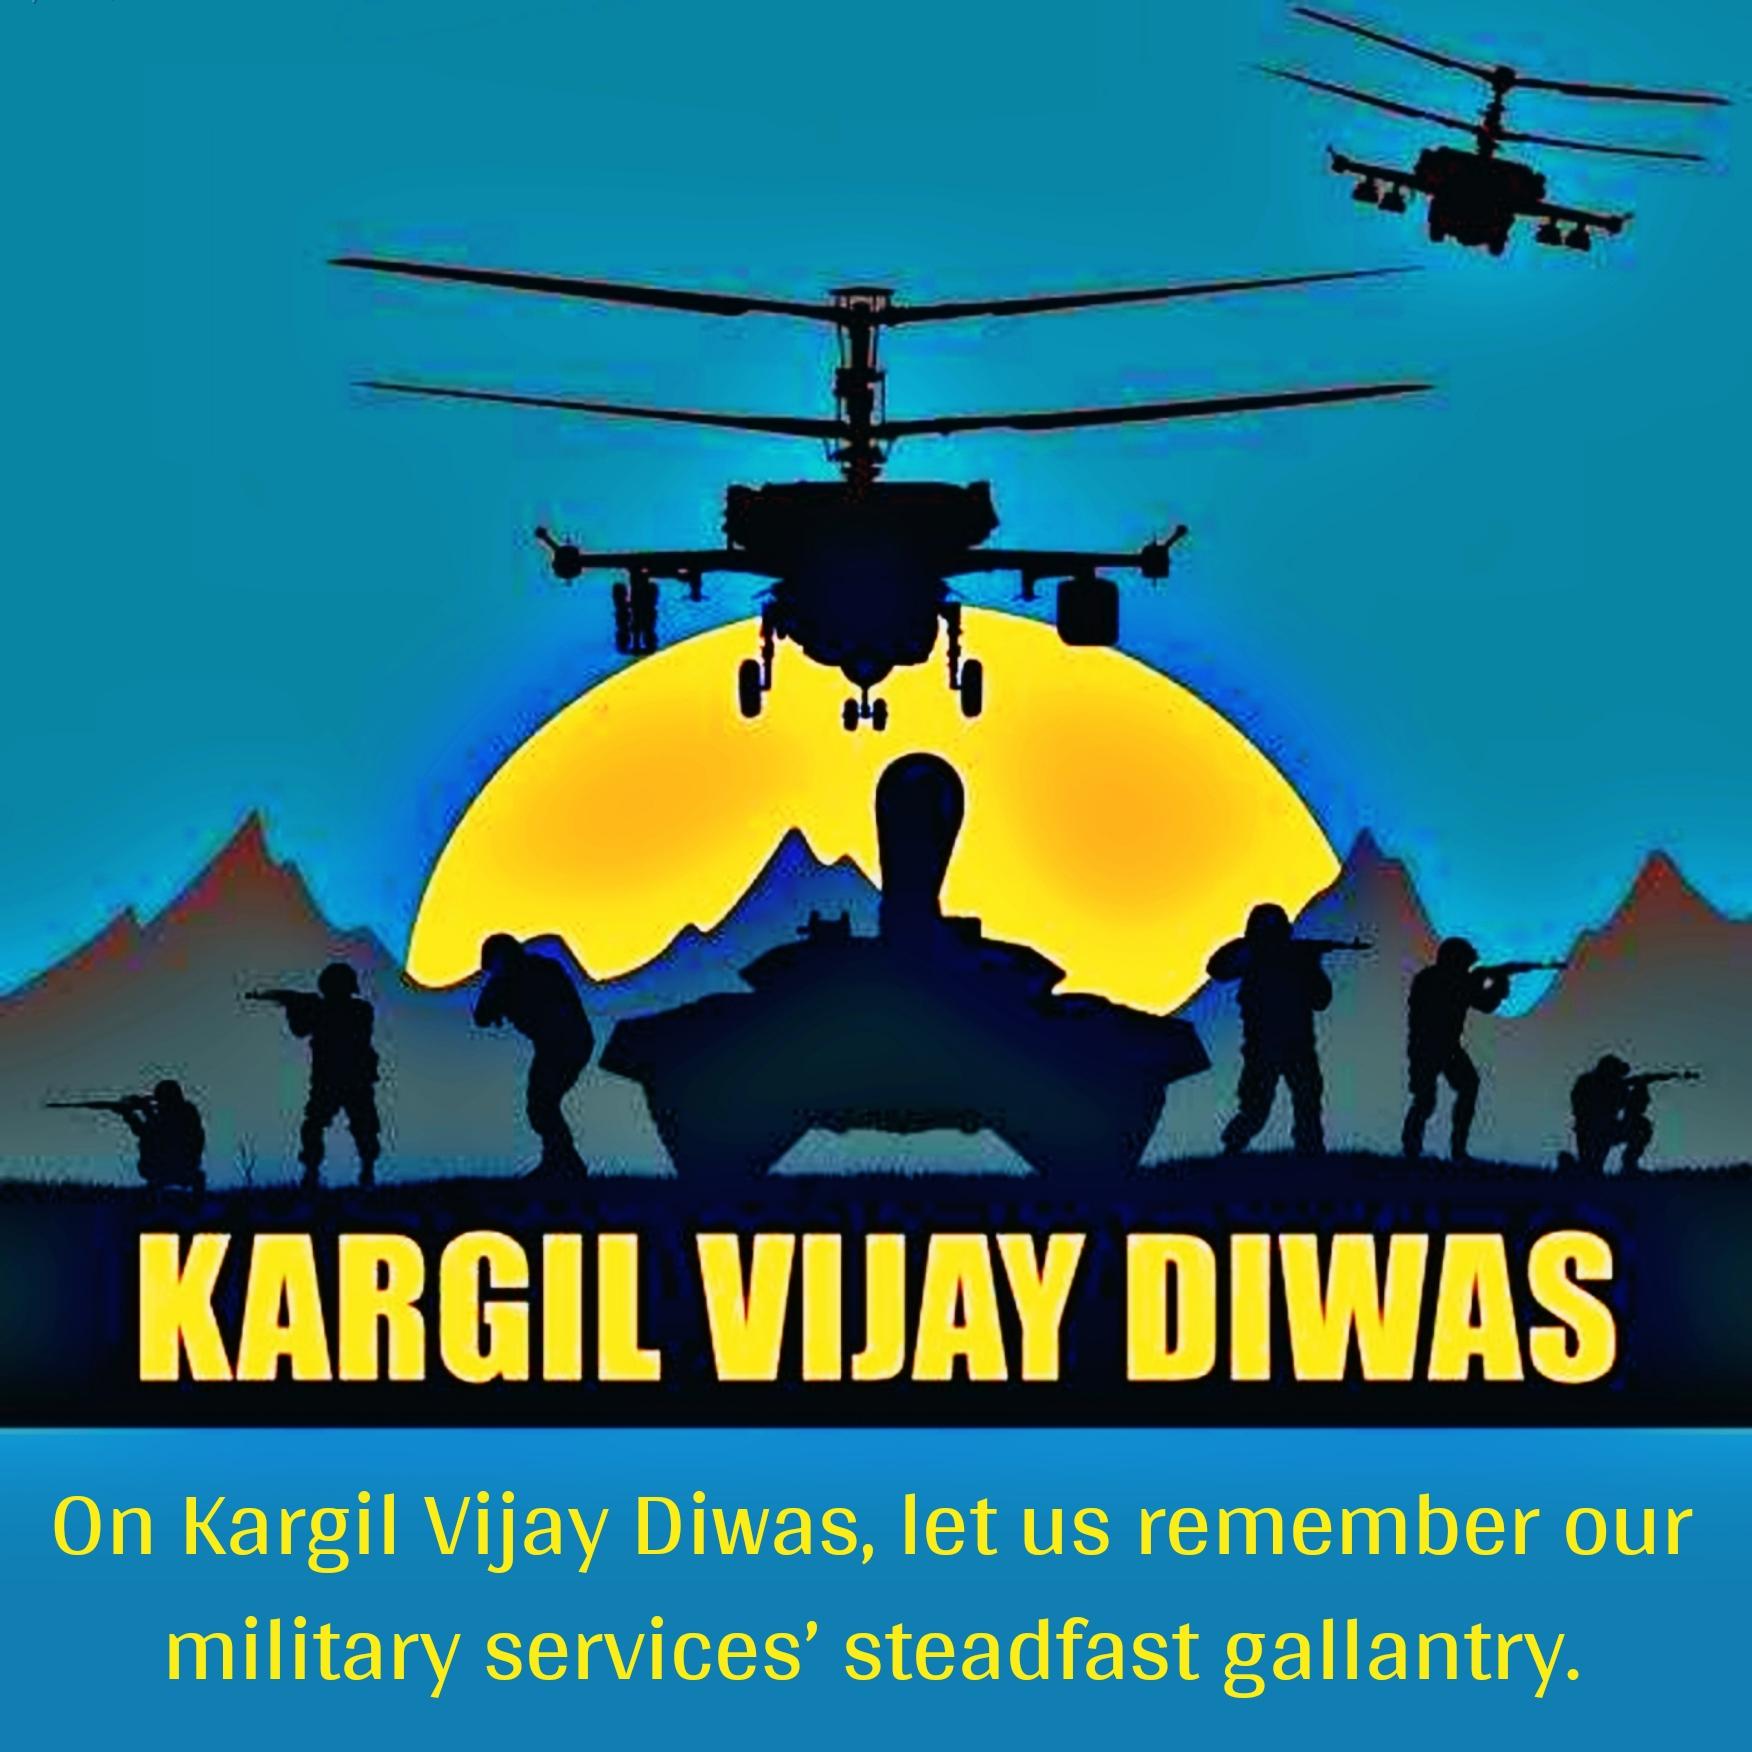 On Kargil Vijay Diwas let us remember our military services steadfast gallantry